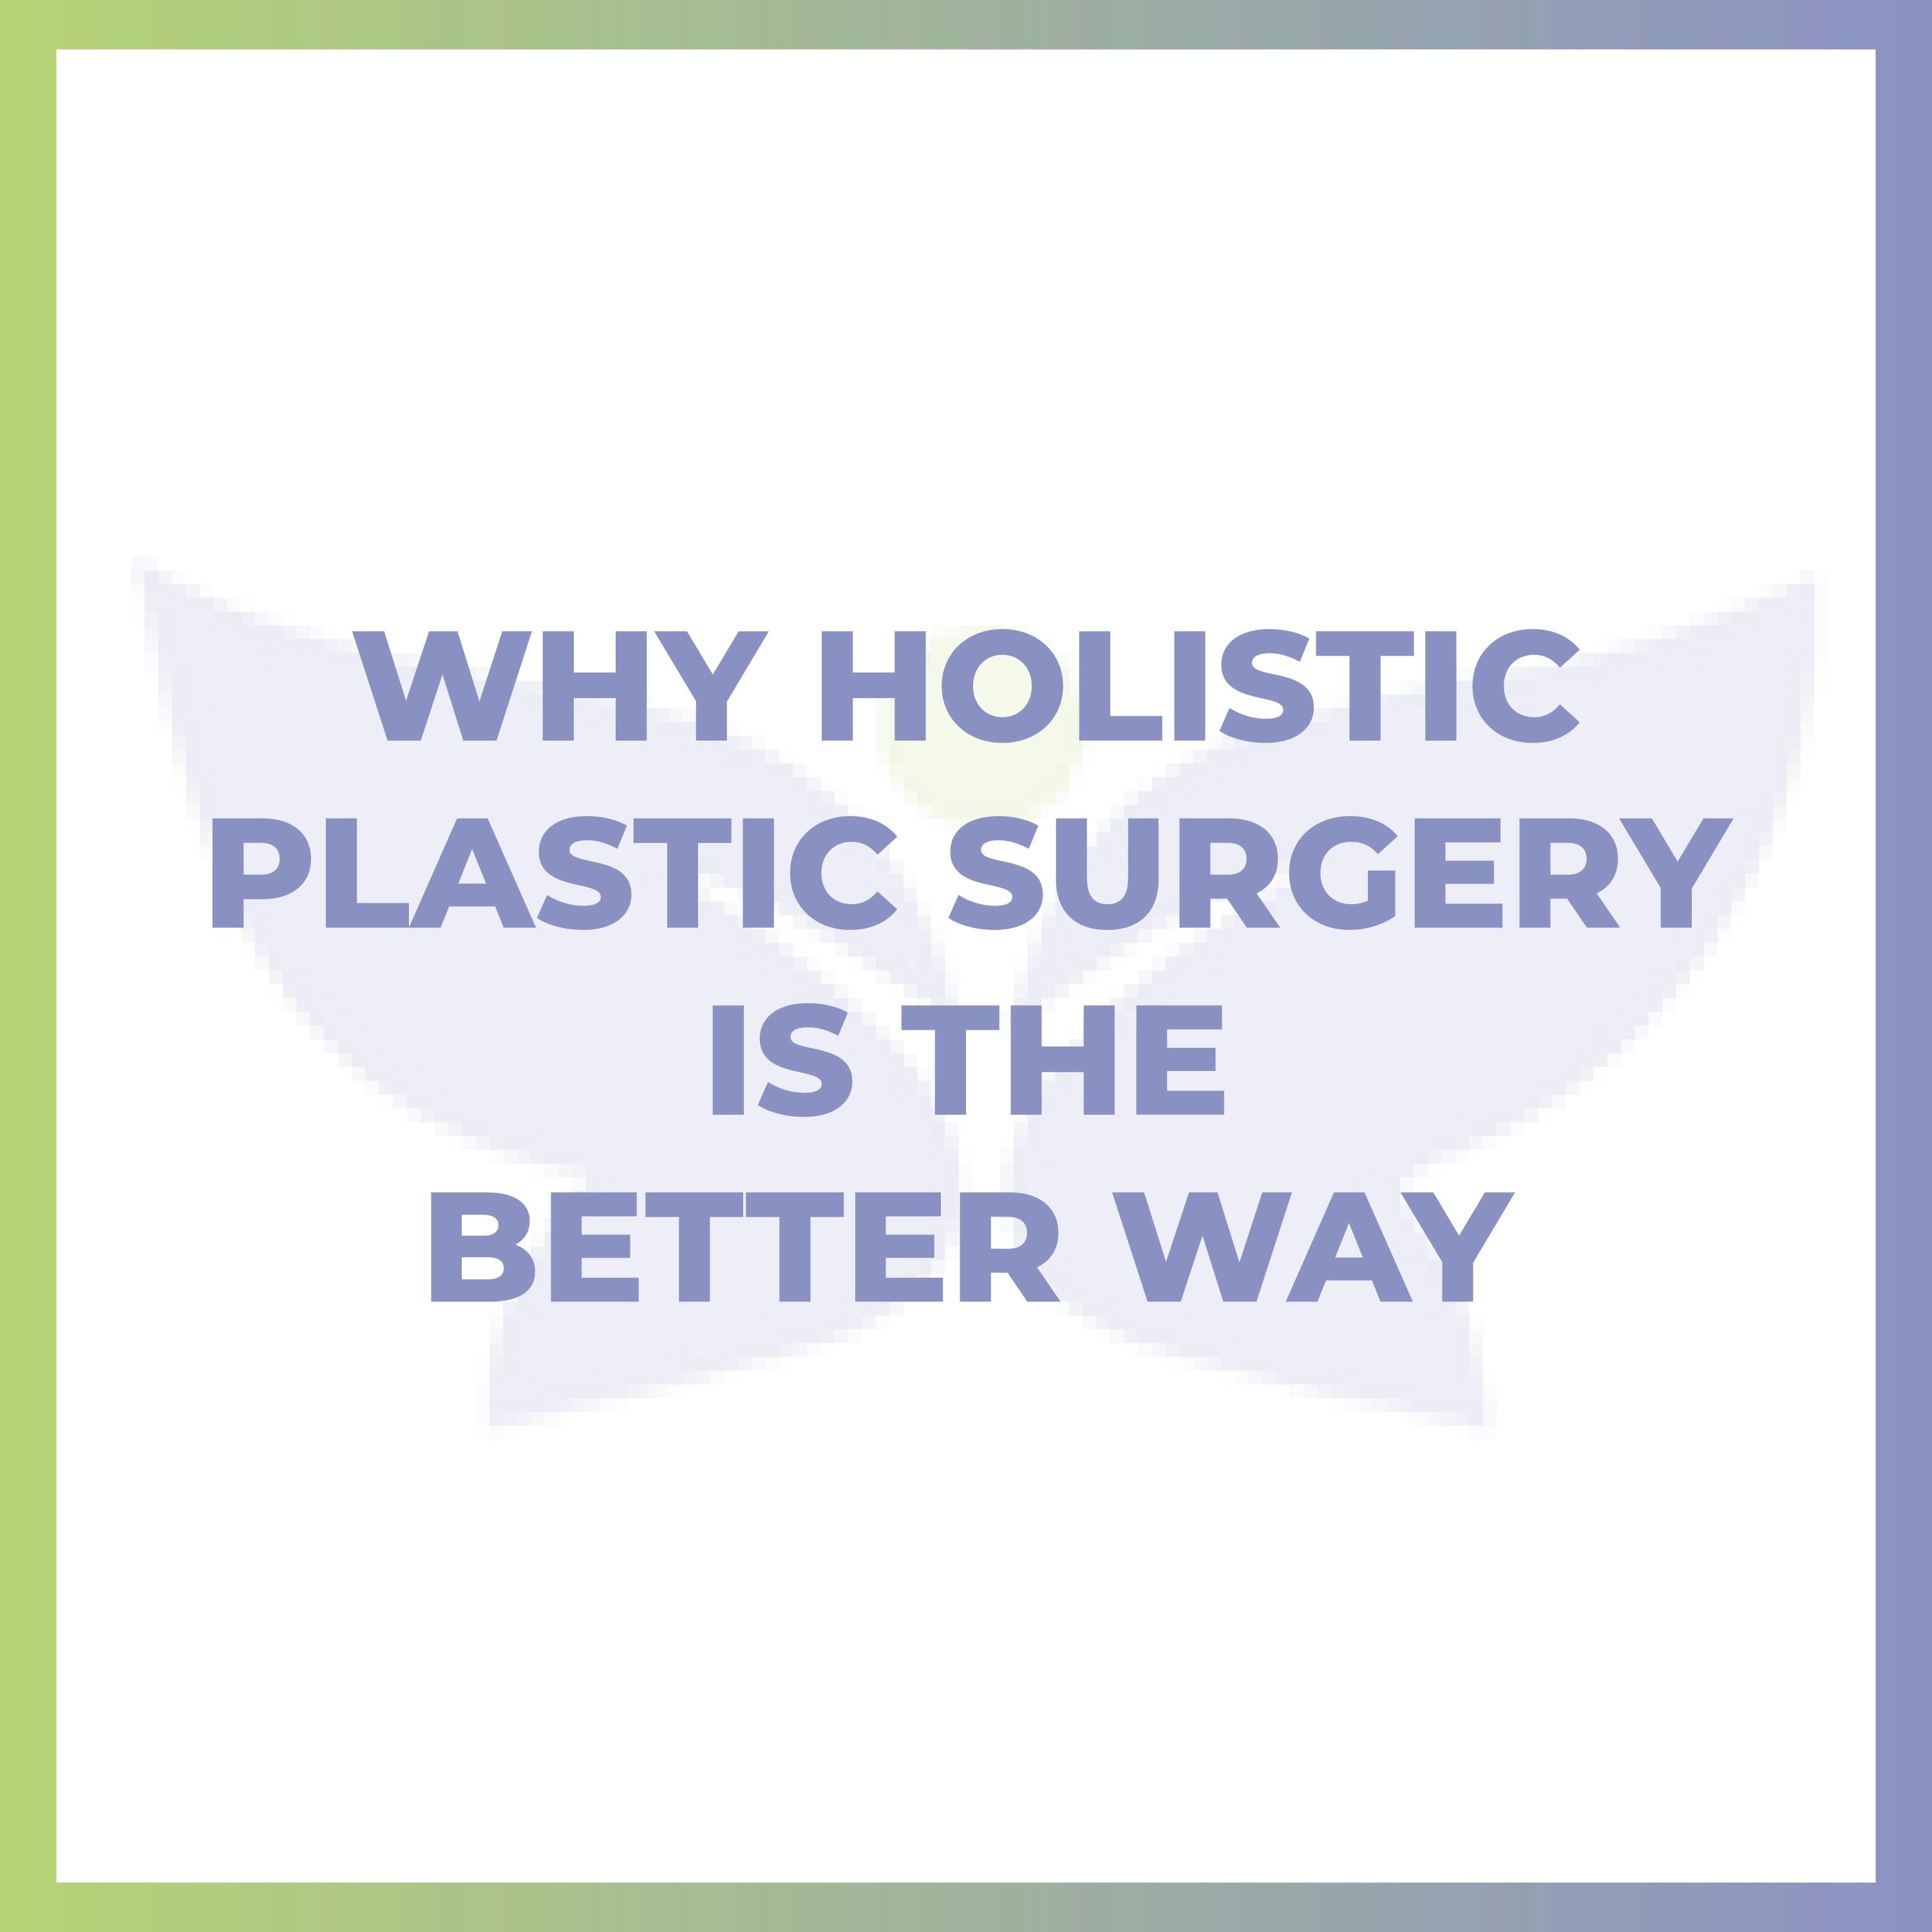 Why Holistic Plastic Surgery Is The Better Way